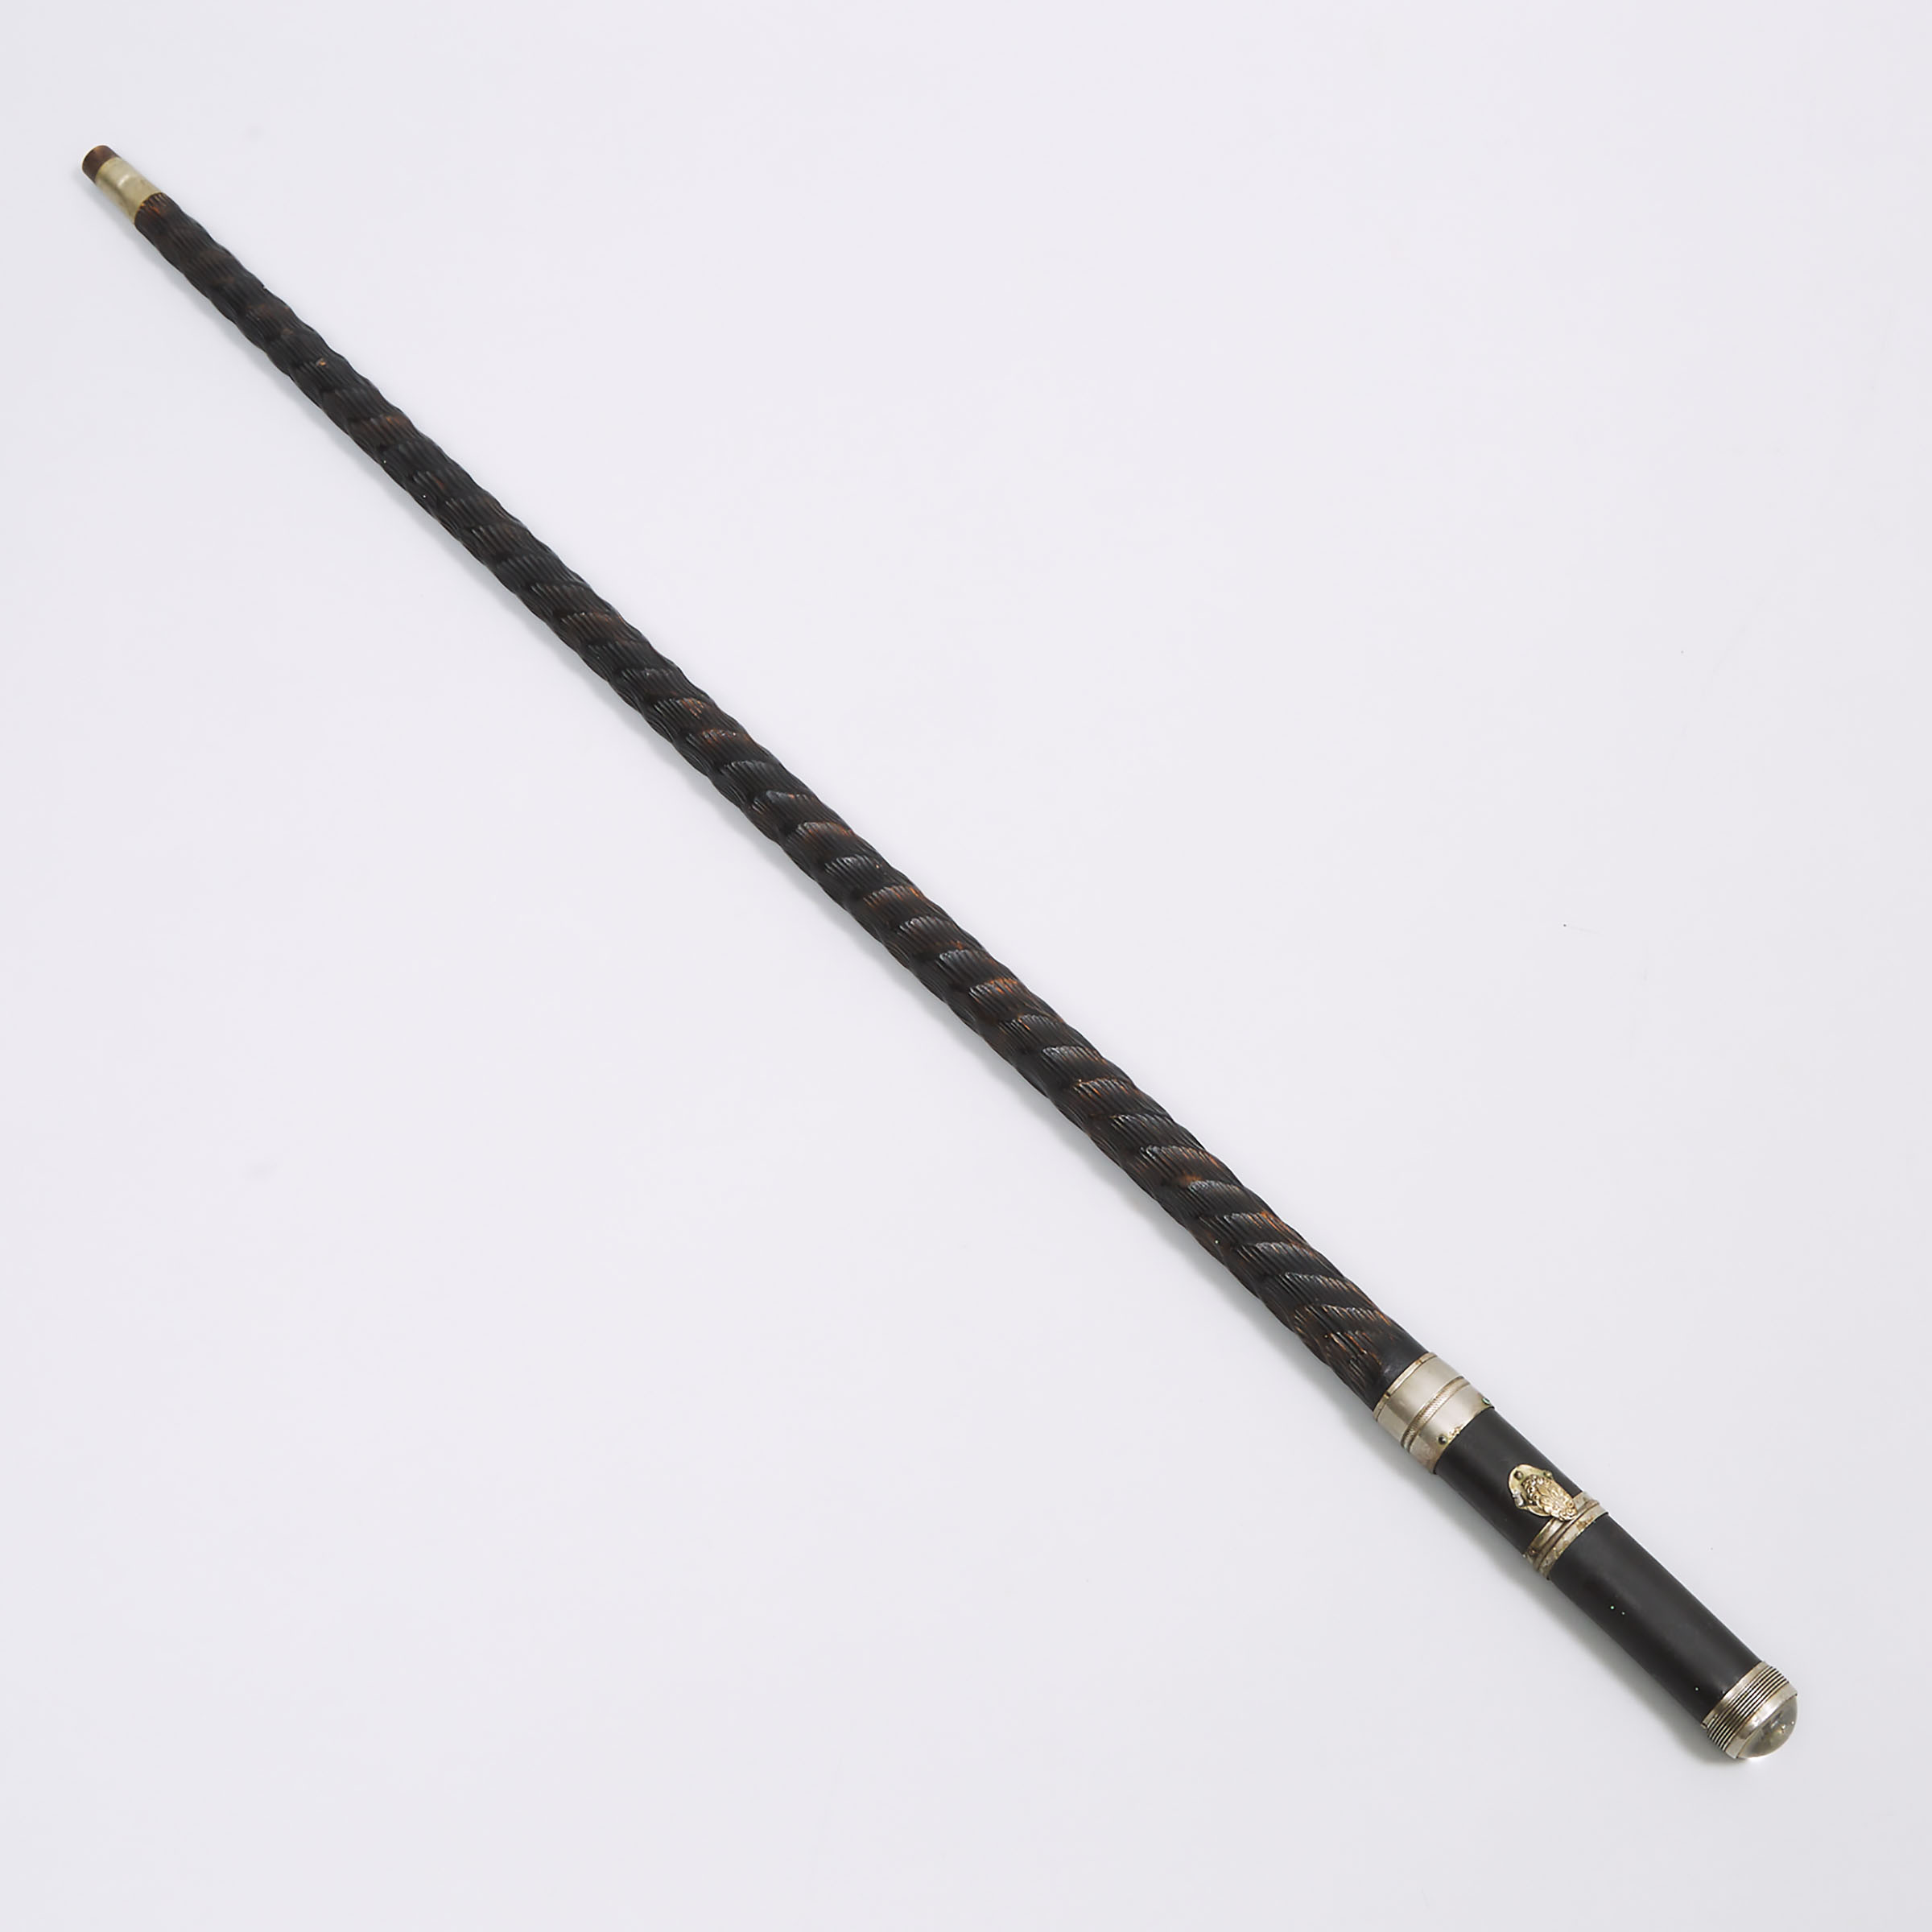 French Carved Ebony System or Gadget Cane, early 20th century